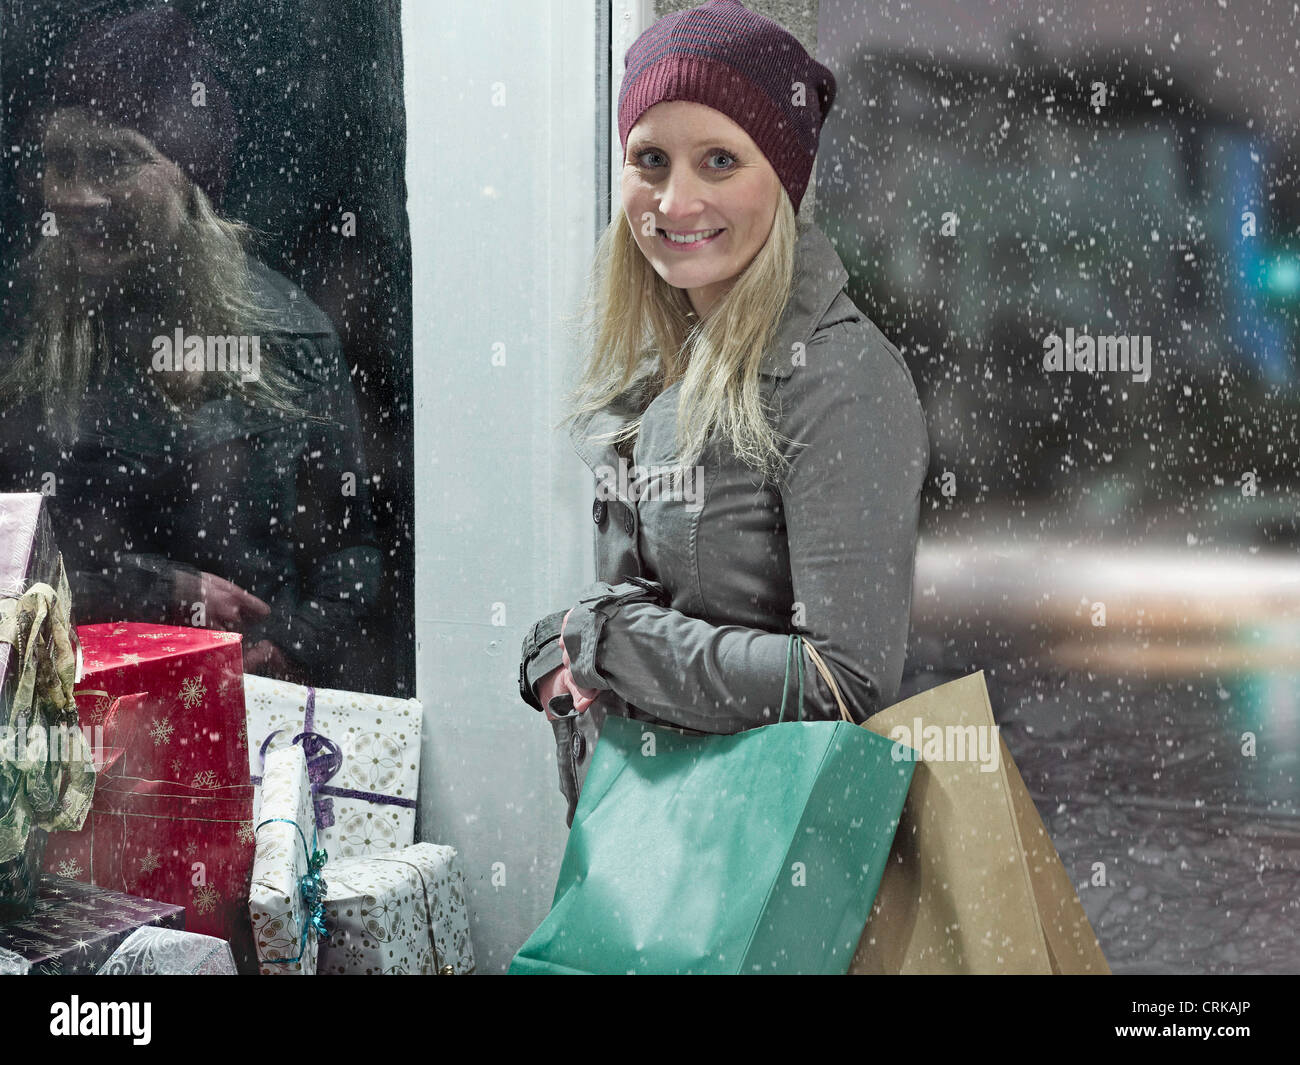 Woman carrying shopping bags in snow Stock Photo